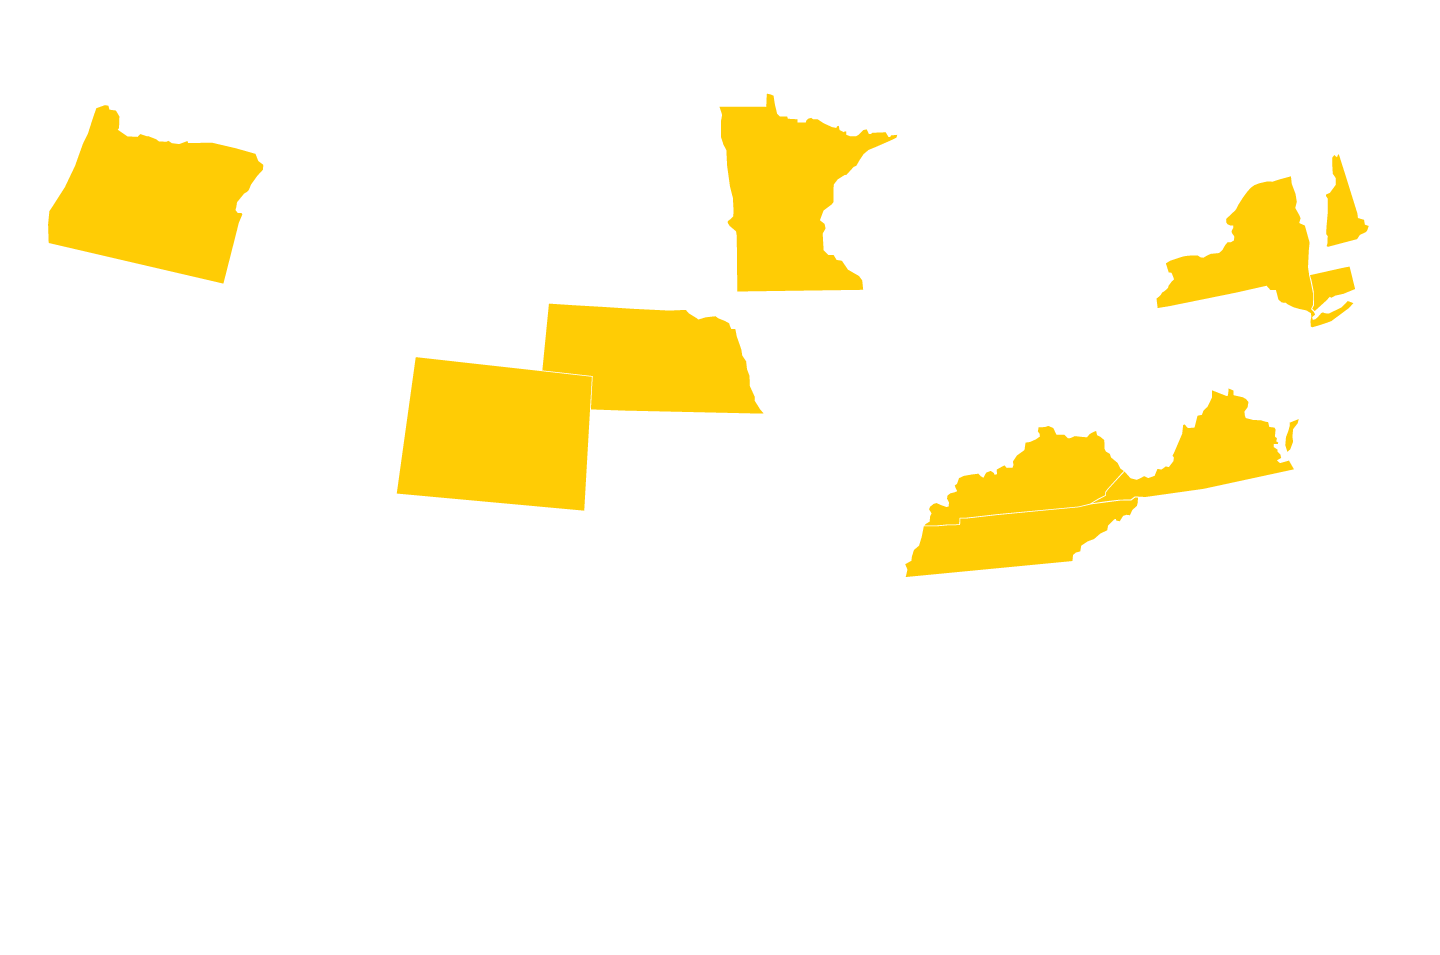 states highlighted in yellow